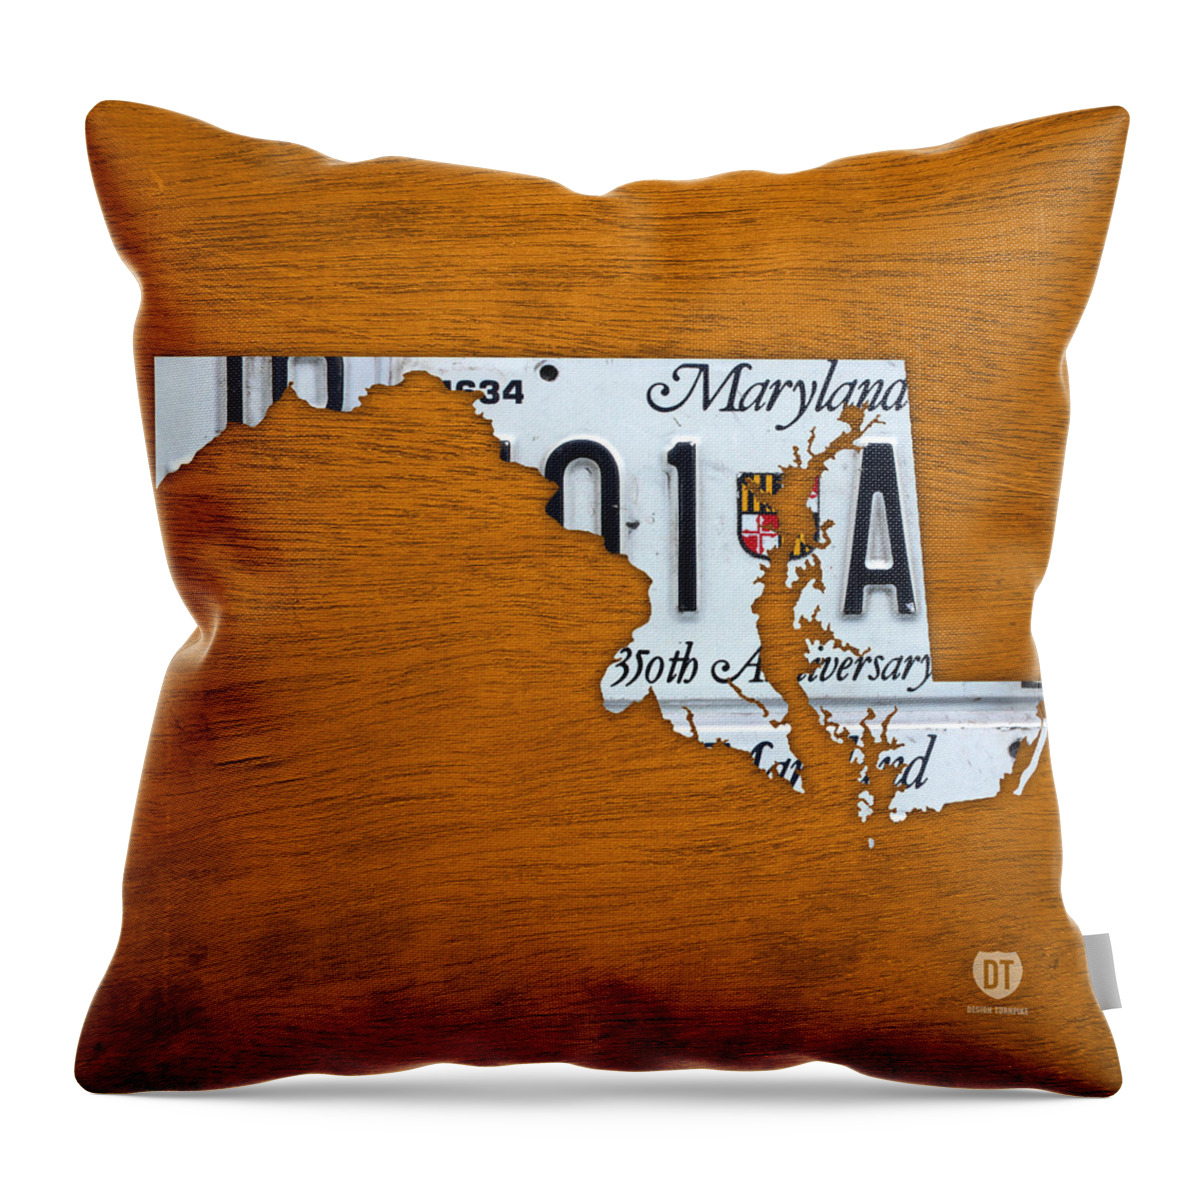 Maryland Throw Pillow featuring the mixed media Maryland State License Plate Map by Design Turnpike